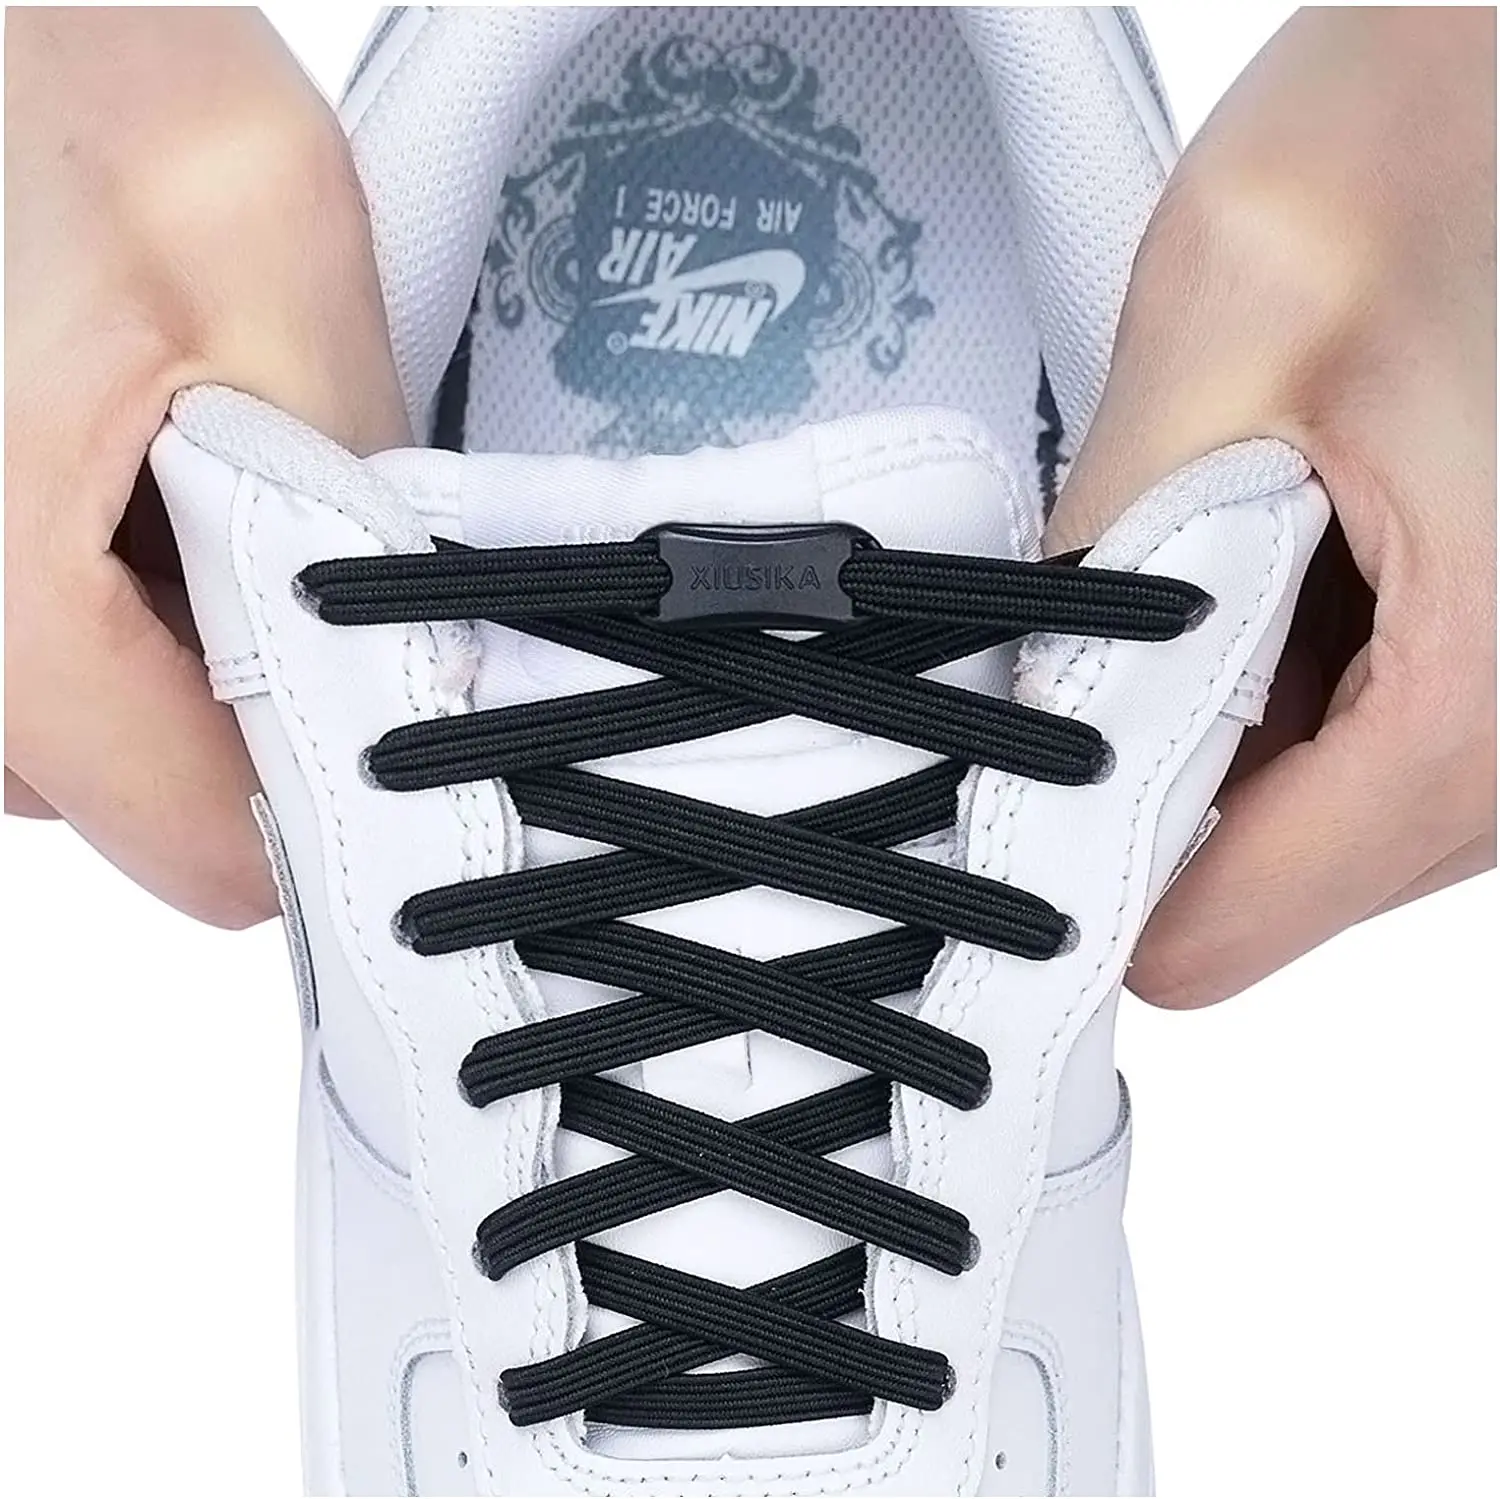 YXQSED Elastic Shoe Laces for Sneakers No tie Shoelaces for Kids and Adult 